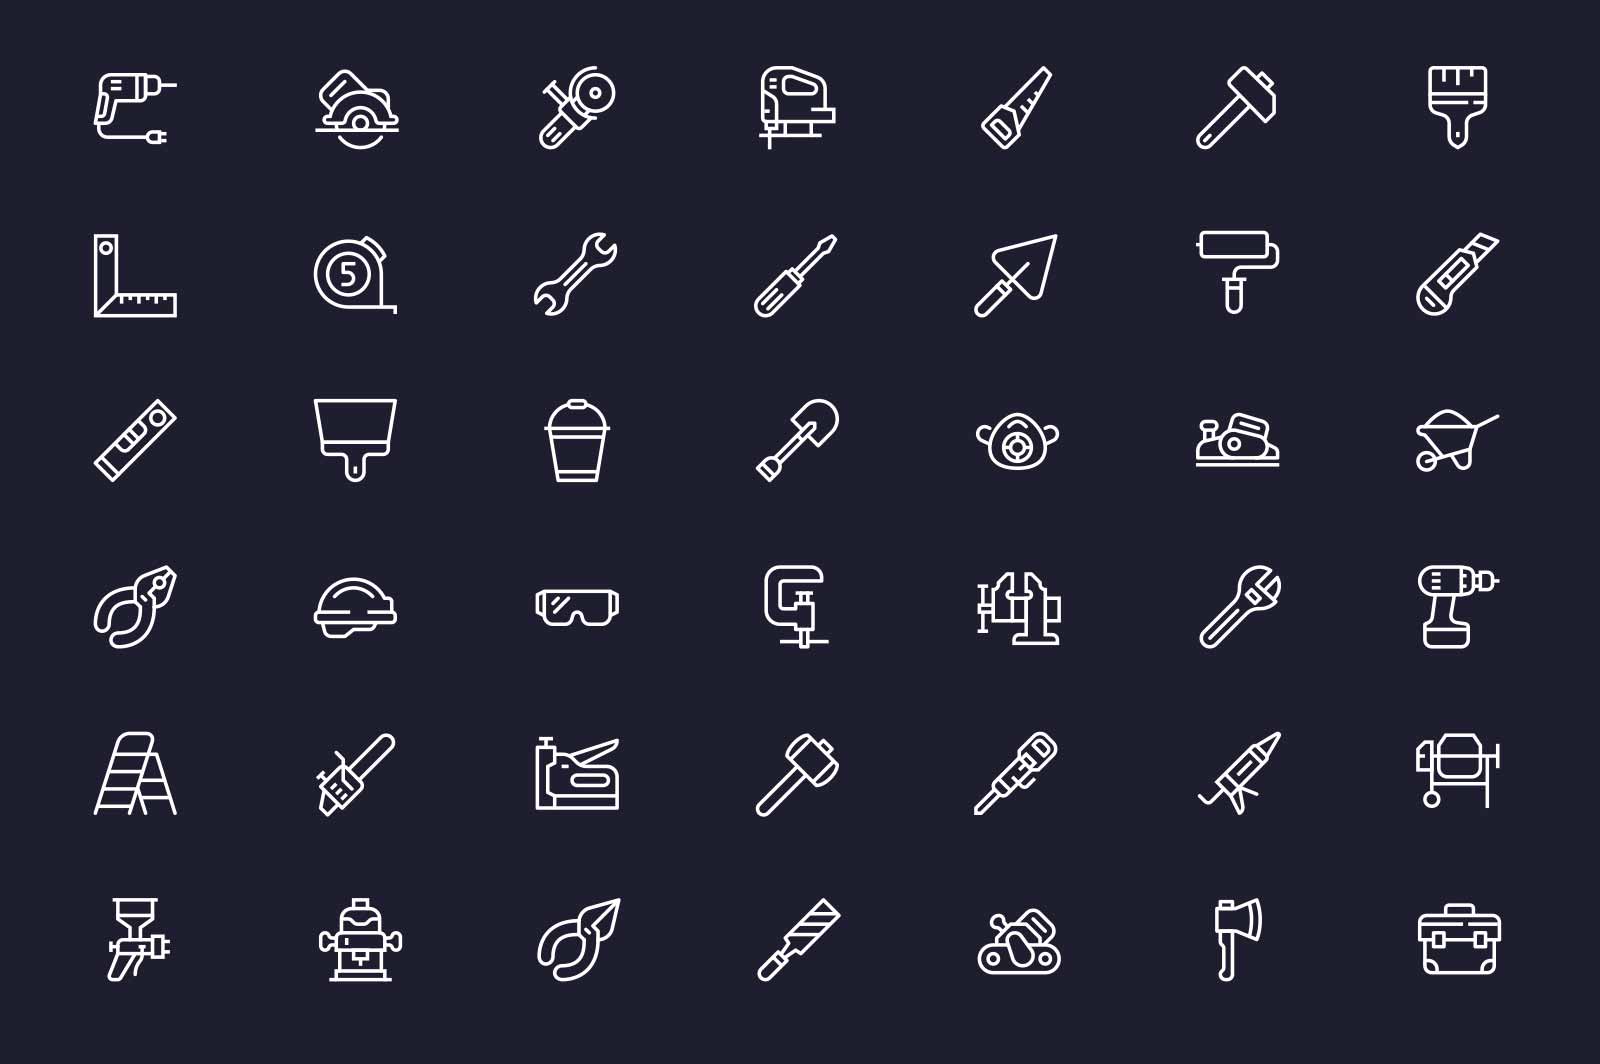 Tools for home repair works icons set vector illustration. Instruments for fixing things line icon. Dark background